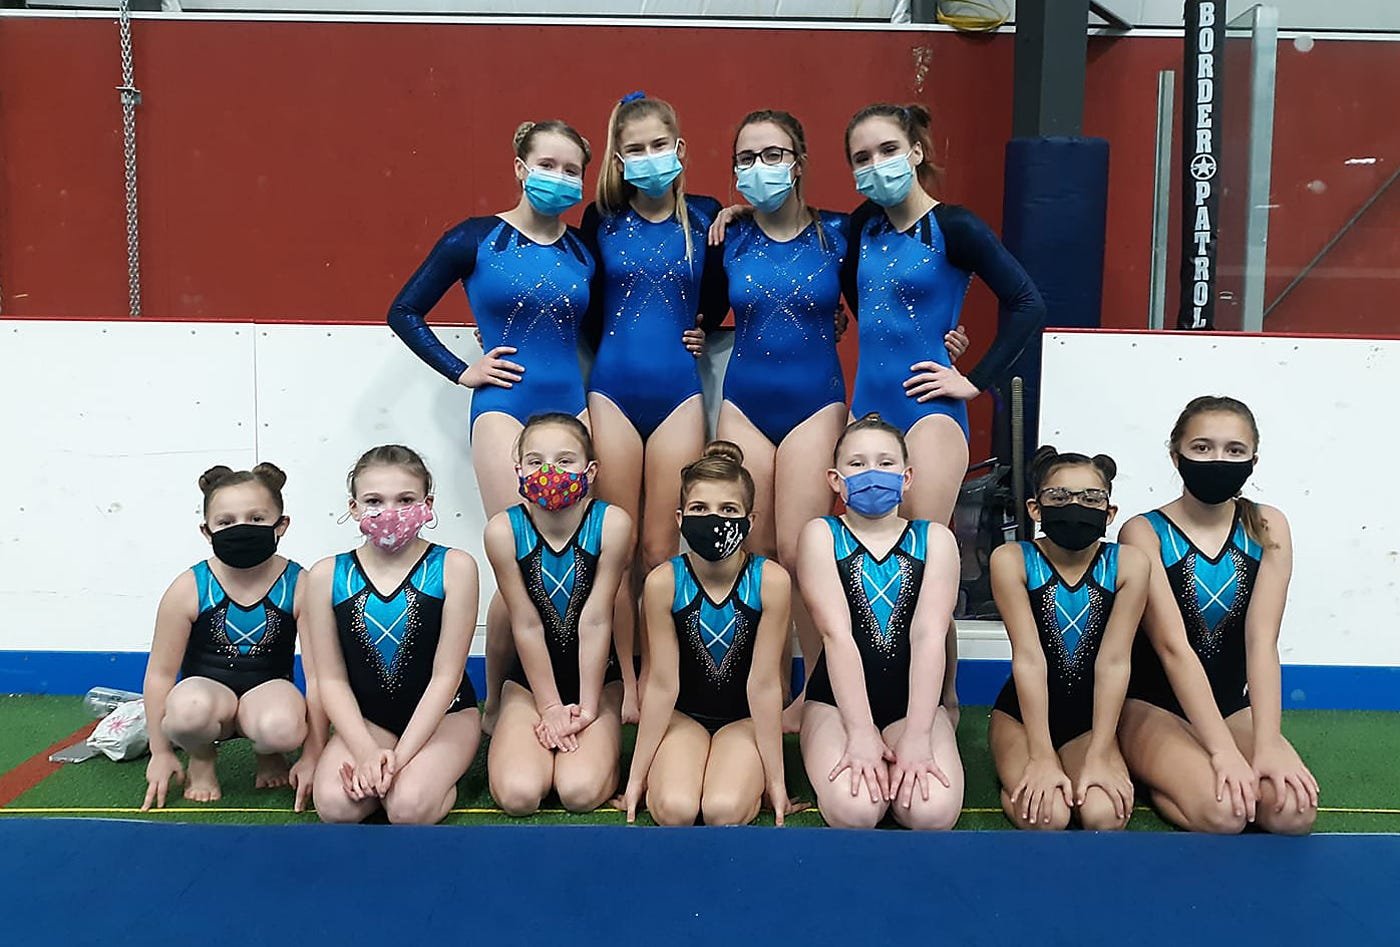 Moberly Gymnastic Academy athletes that competed Jan. 8 at a meet held at Washington, Mo. are Rayleigh Pierce, Sable Blair, Eliana Weiseman, Ansley Boone, Trystan Tiegte, Madison McNamarra and Soulee Best. Second row is Kaleighia Brown, Anna Rivera, Maggie Langston and Katie Phillips.